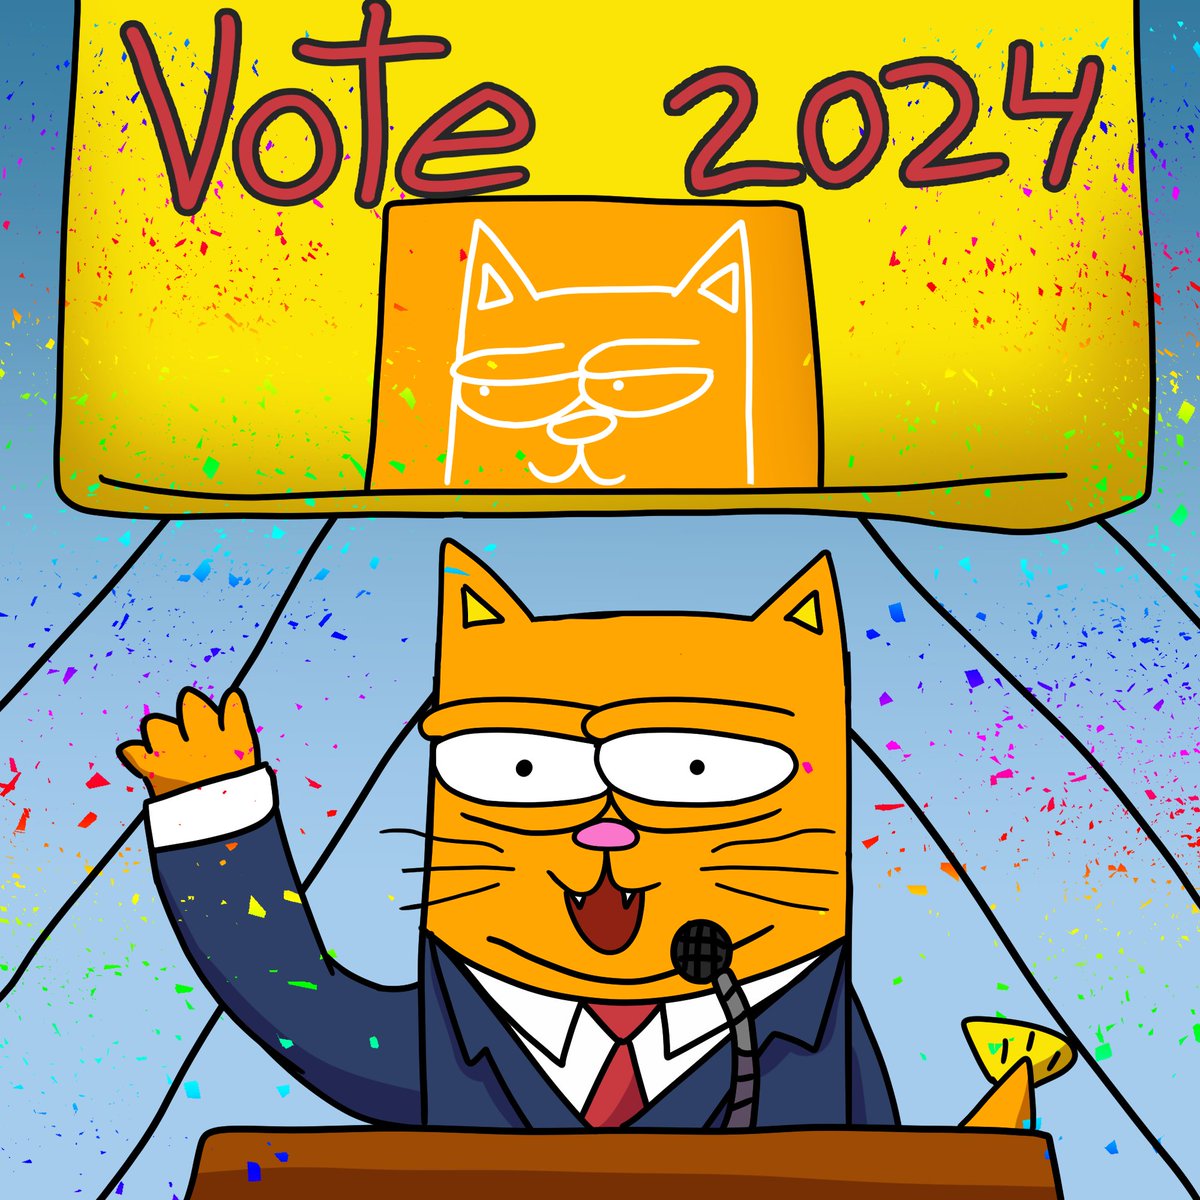 📢📢📣🥳ANNOUNCEMENT🥳📣📢📢 Breaking News: Catfish Announces Presidential Run! In an unprecedented turn of events, Catfish has officially announced its candidacy for President of the United States. This slippery contender plans to swim between the political heavyweights, Jeo